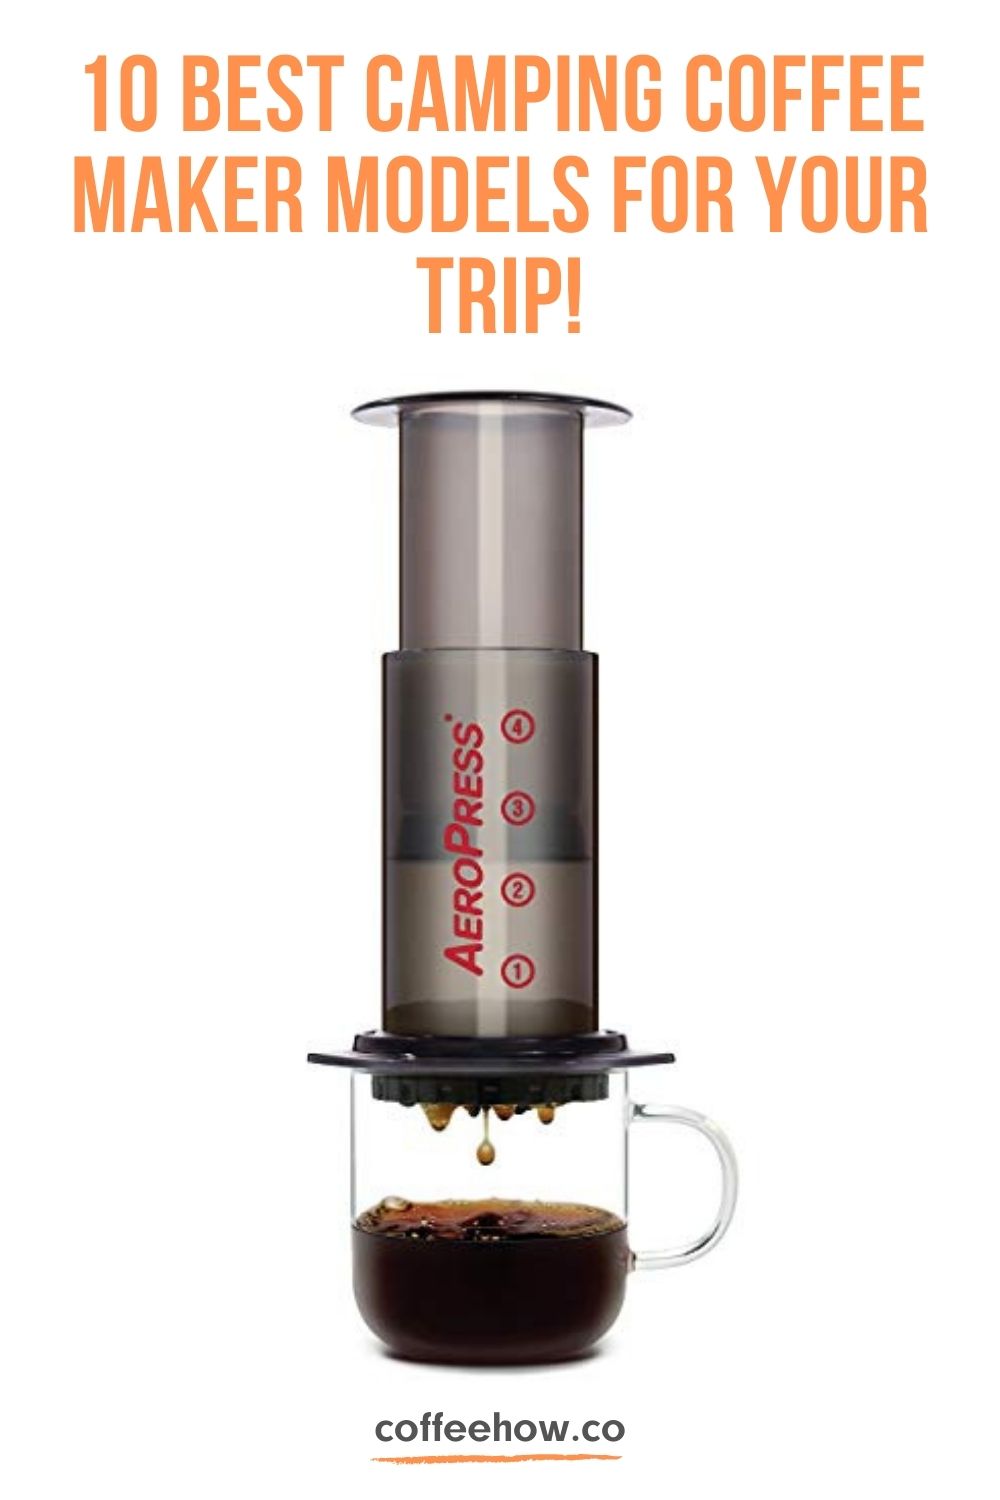 10 Best Camping Coffee Maker Models For Your Camping Trip